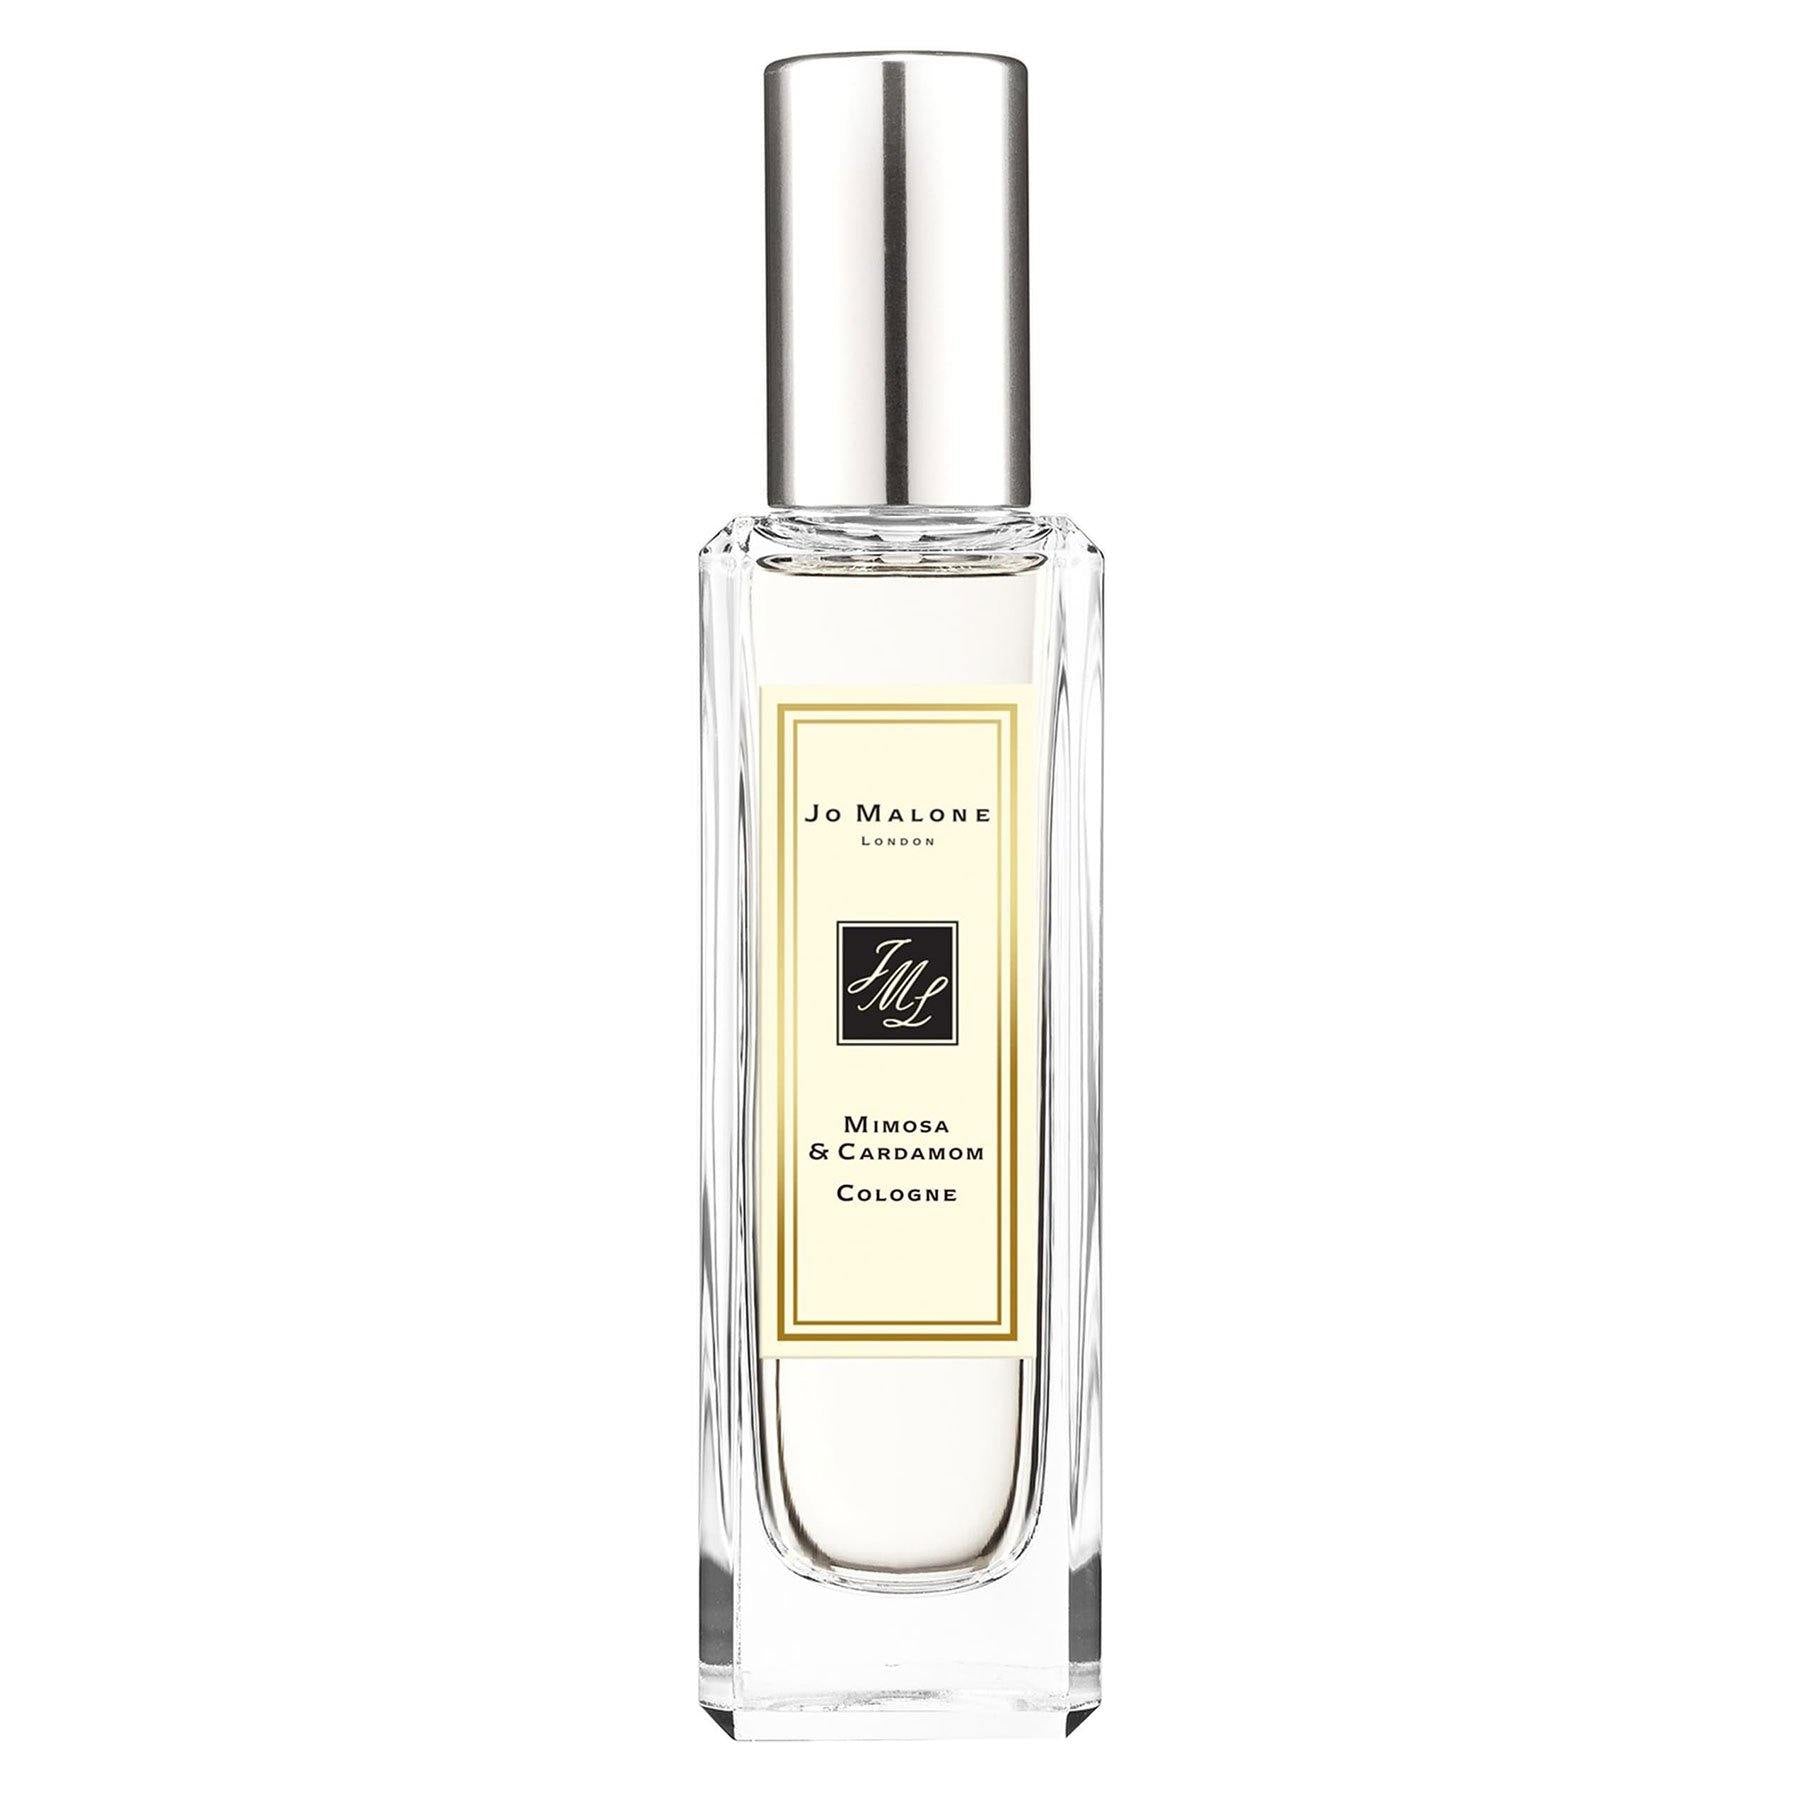 Mimosa & Cardamom Cologne - Cosmos Boutique New Jersey